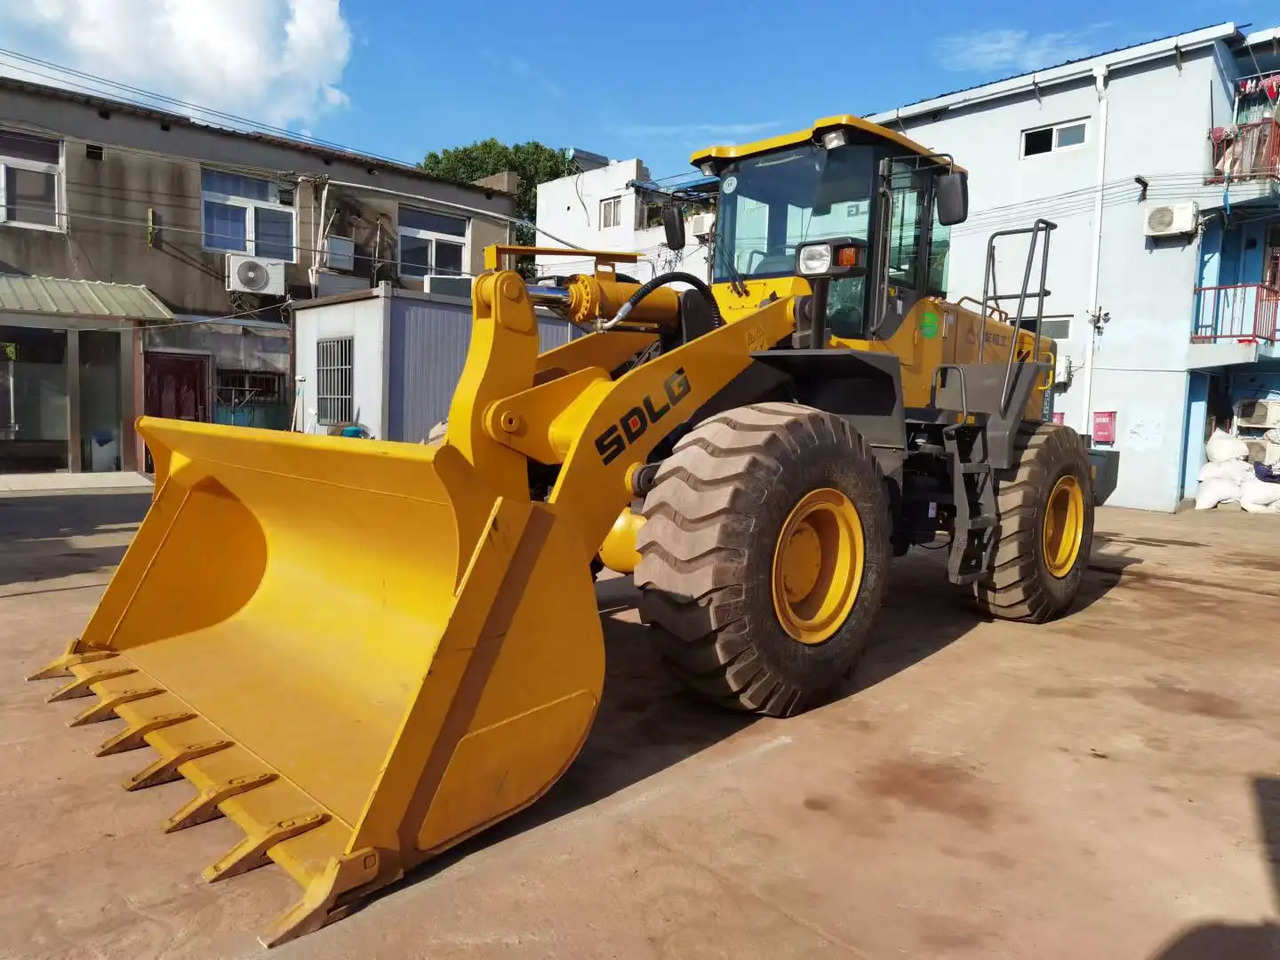 Wheel loader SDLG956L USED almost new front wheeled loaders wheel loader 10ton loader 10 tons